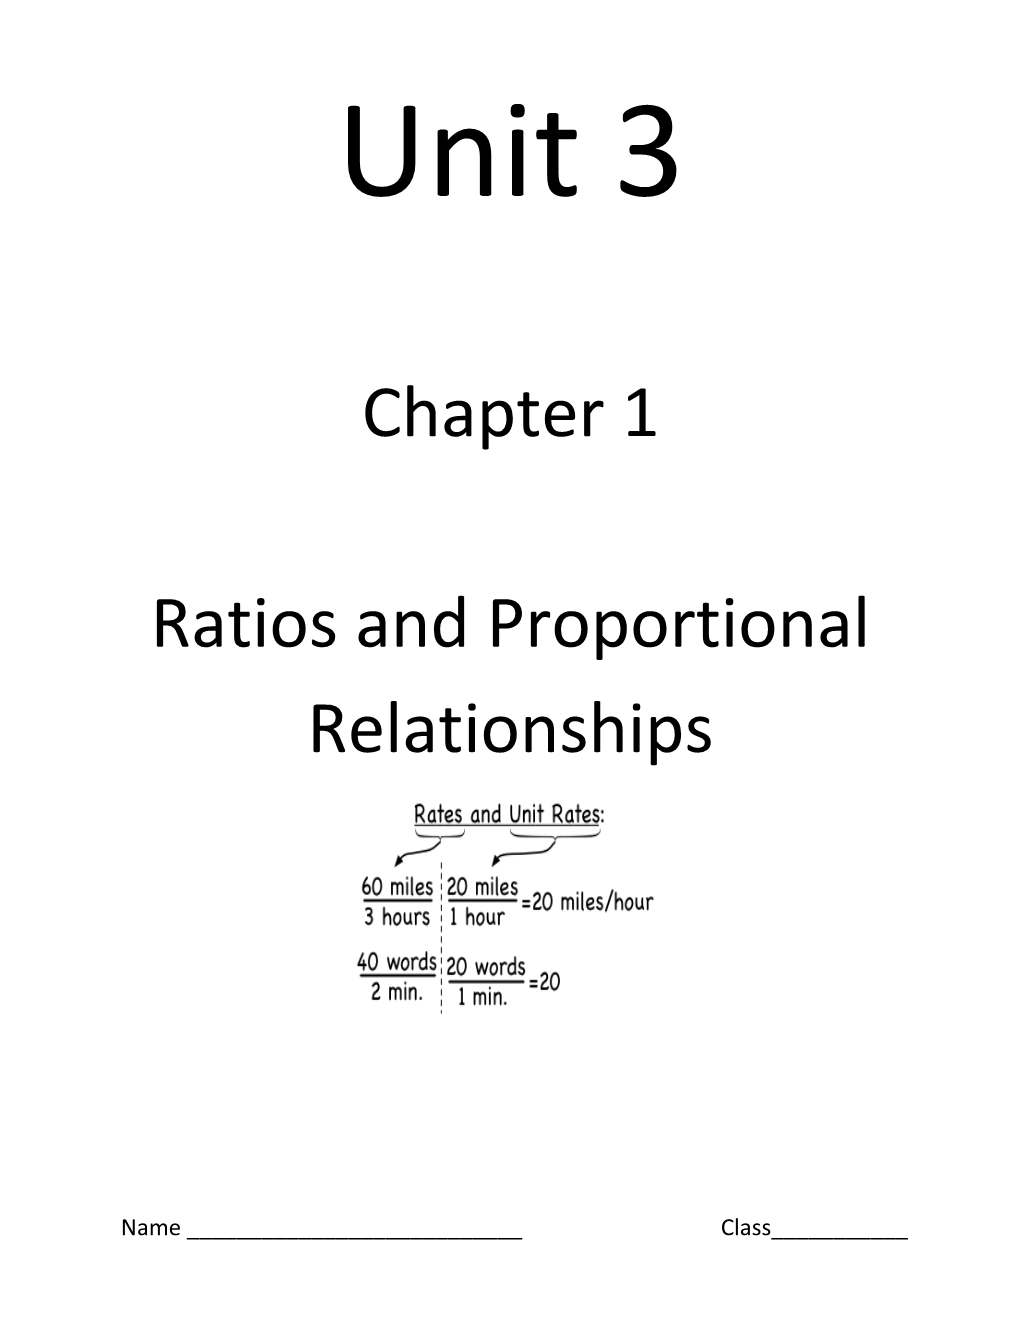 Ratios and Proportional Relationships s1